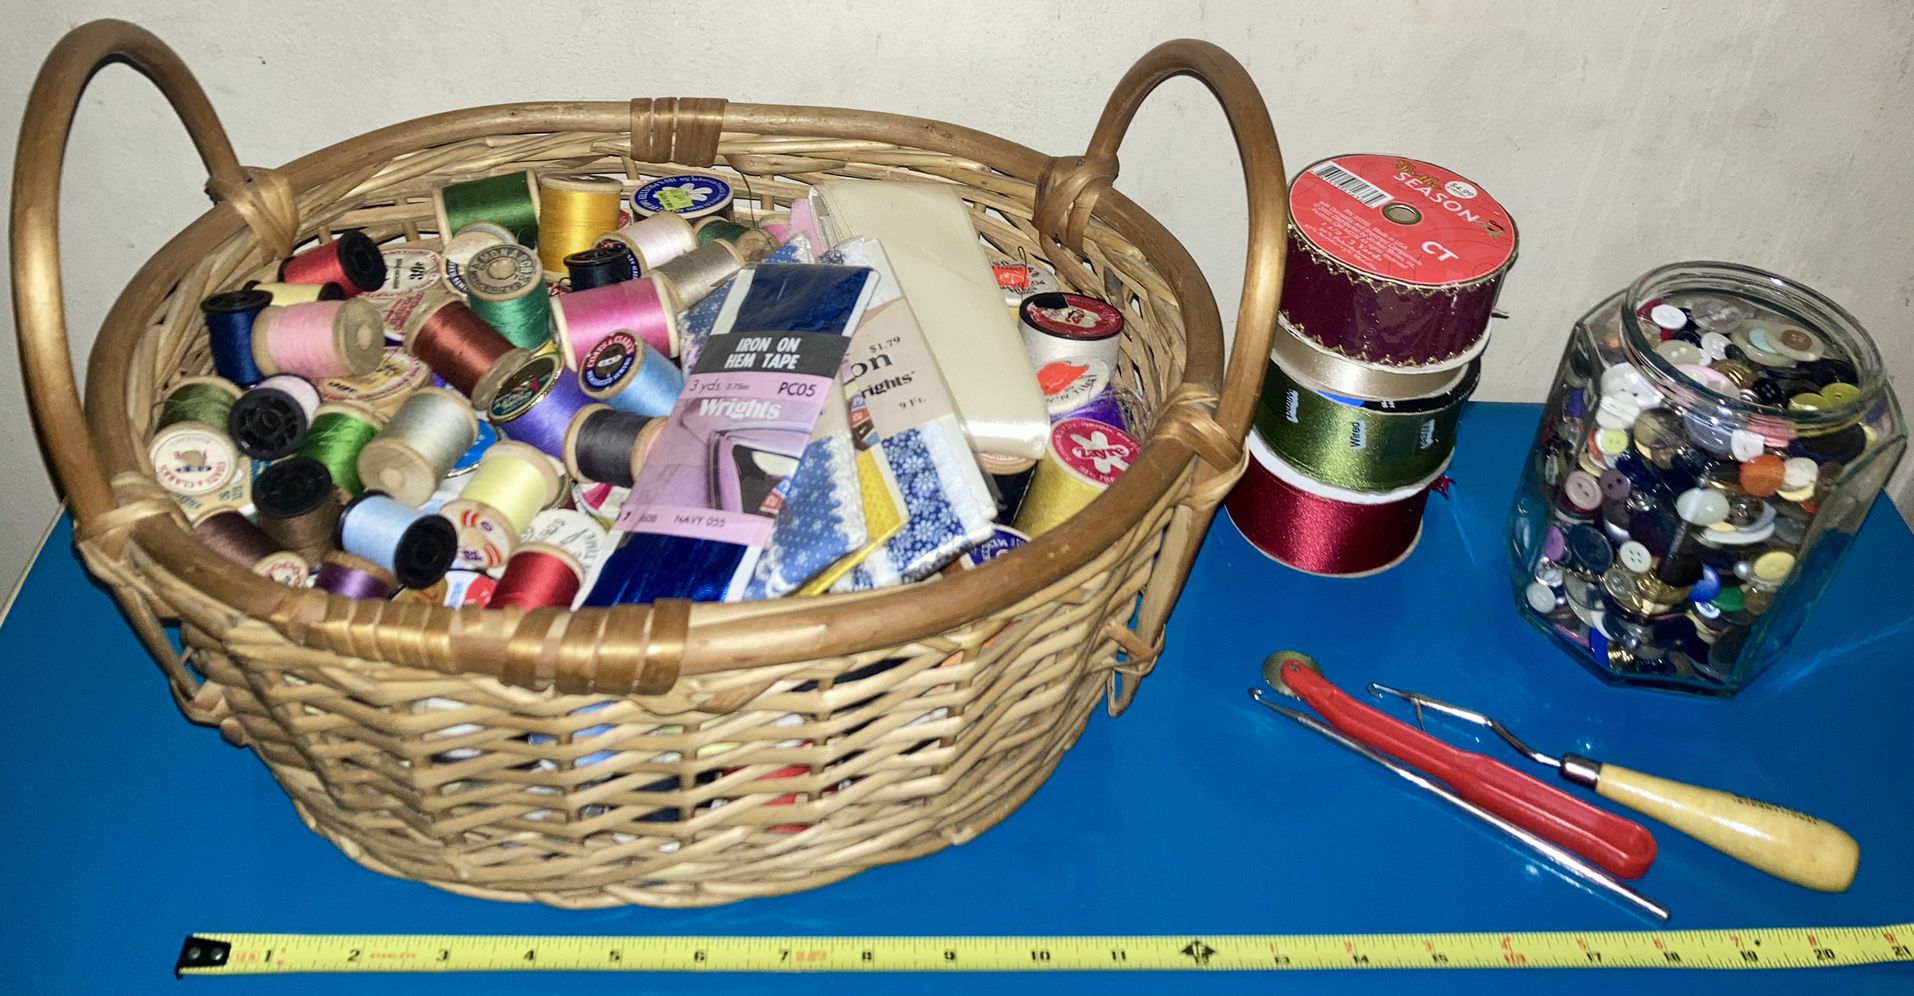 Lots Of Sewing Thread in A Nice Basket, Jar Of Over 100 Buttons, Craft Ribbon And Misc. Sewing Tools 